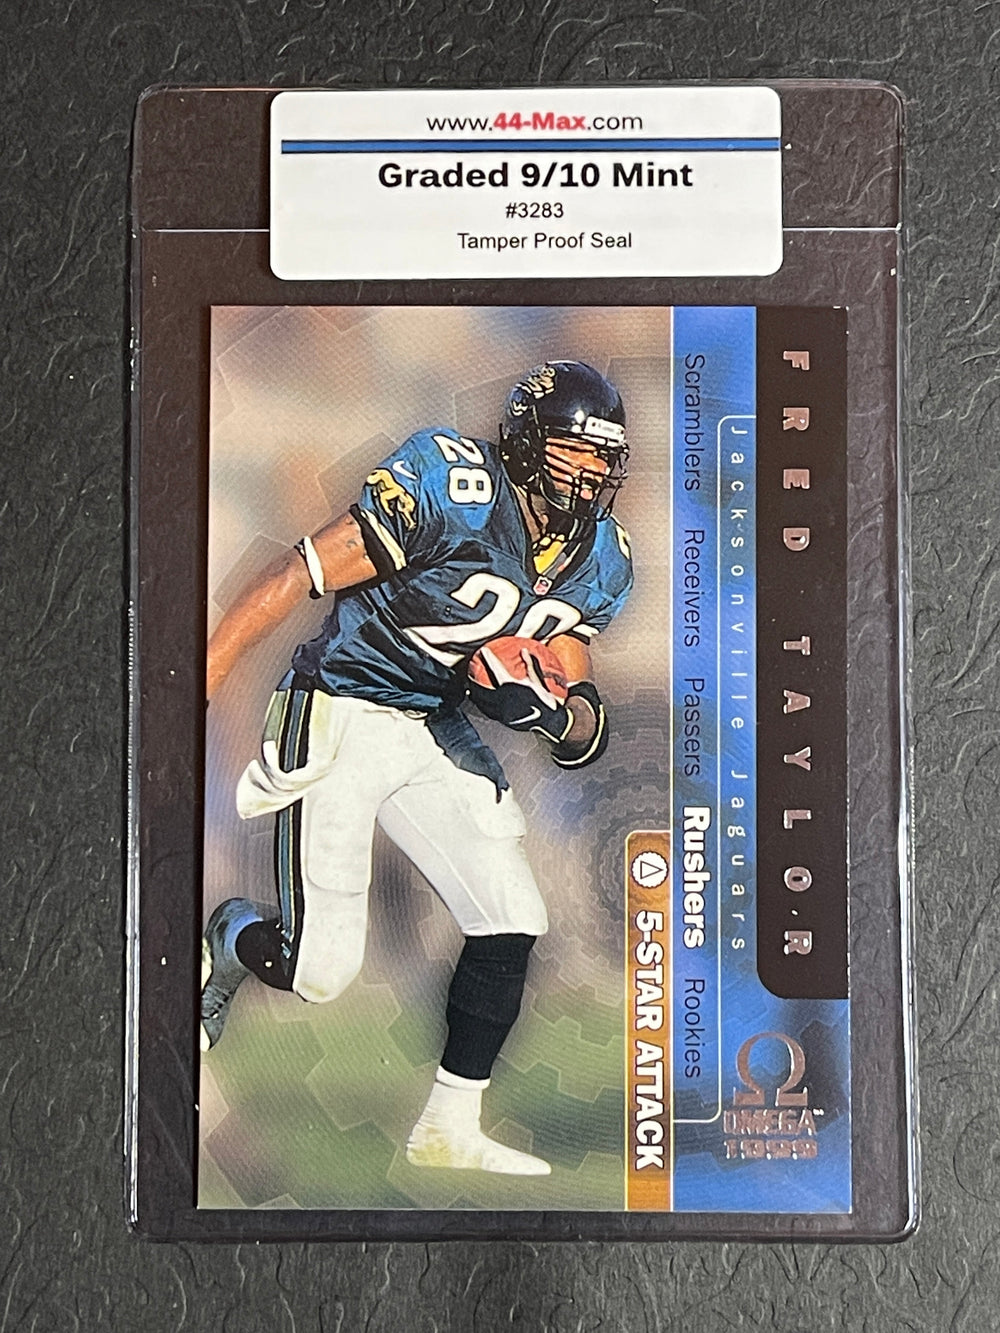 Red Taylor 1999 Omega #16 Panthers Card. 44-Max 9/10 Mint #3283